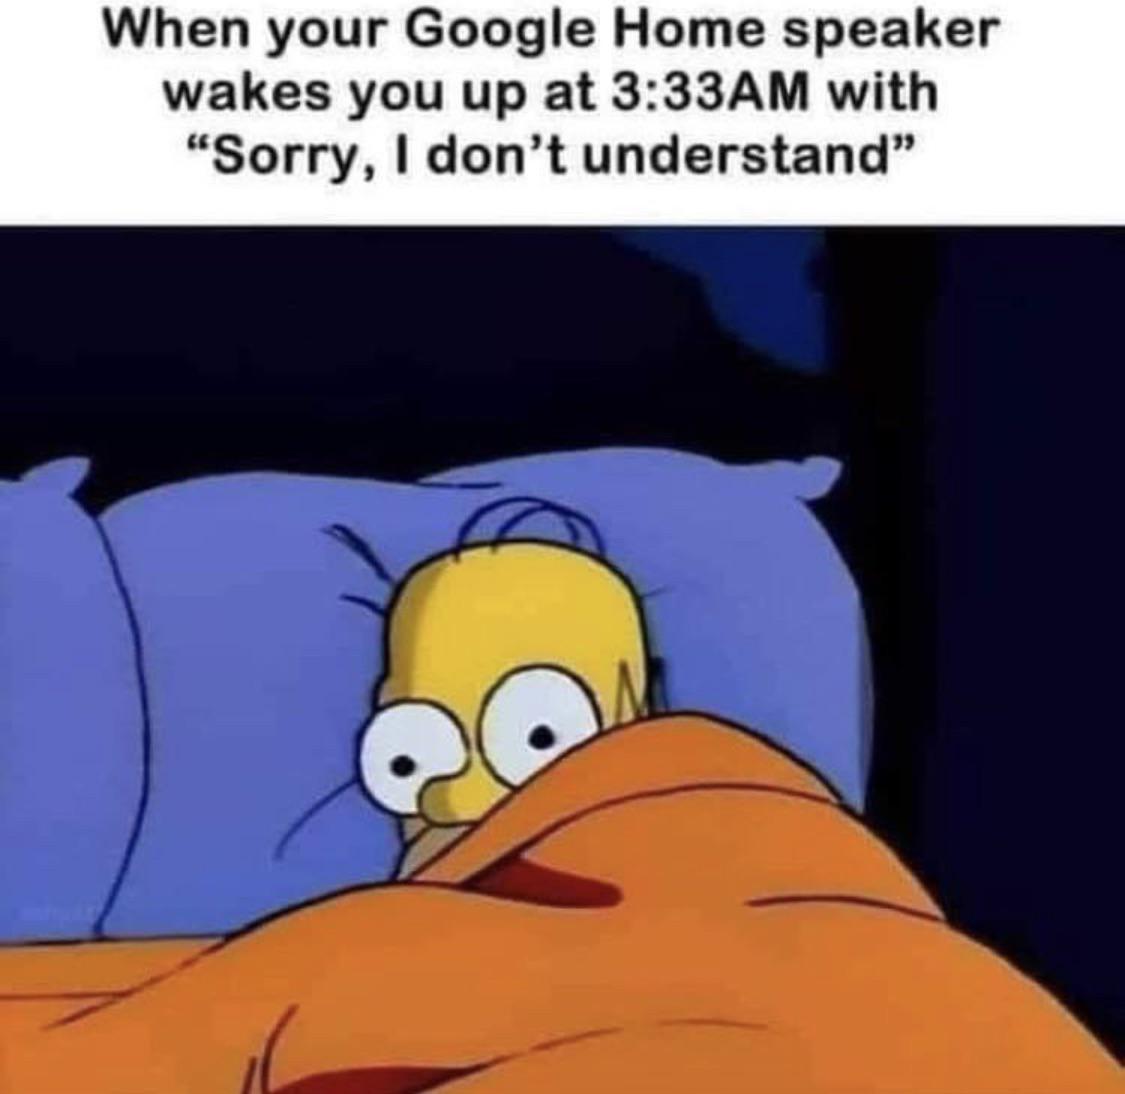 monday morning randomness - cartoon - When your Google Home speaker wakes you up at Am with "Sorry, I don't understand"